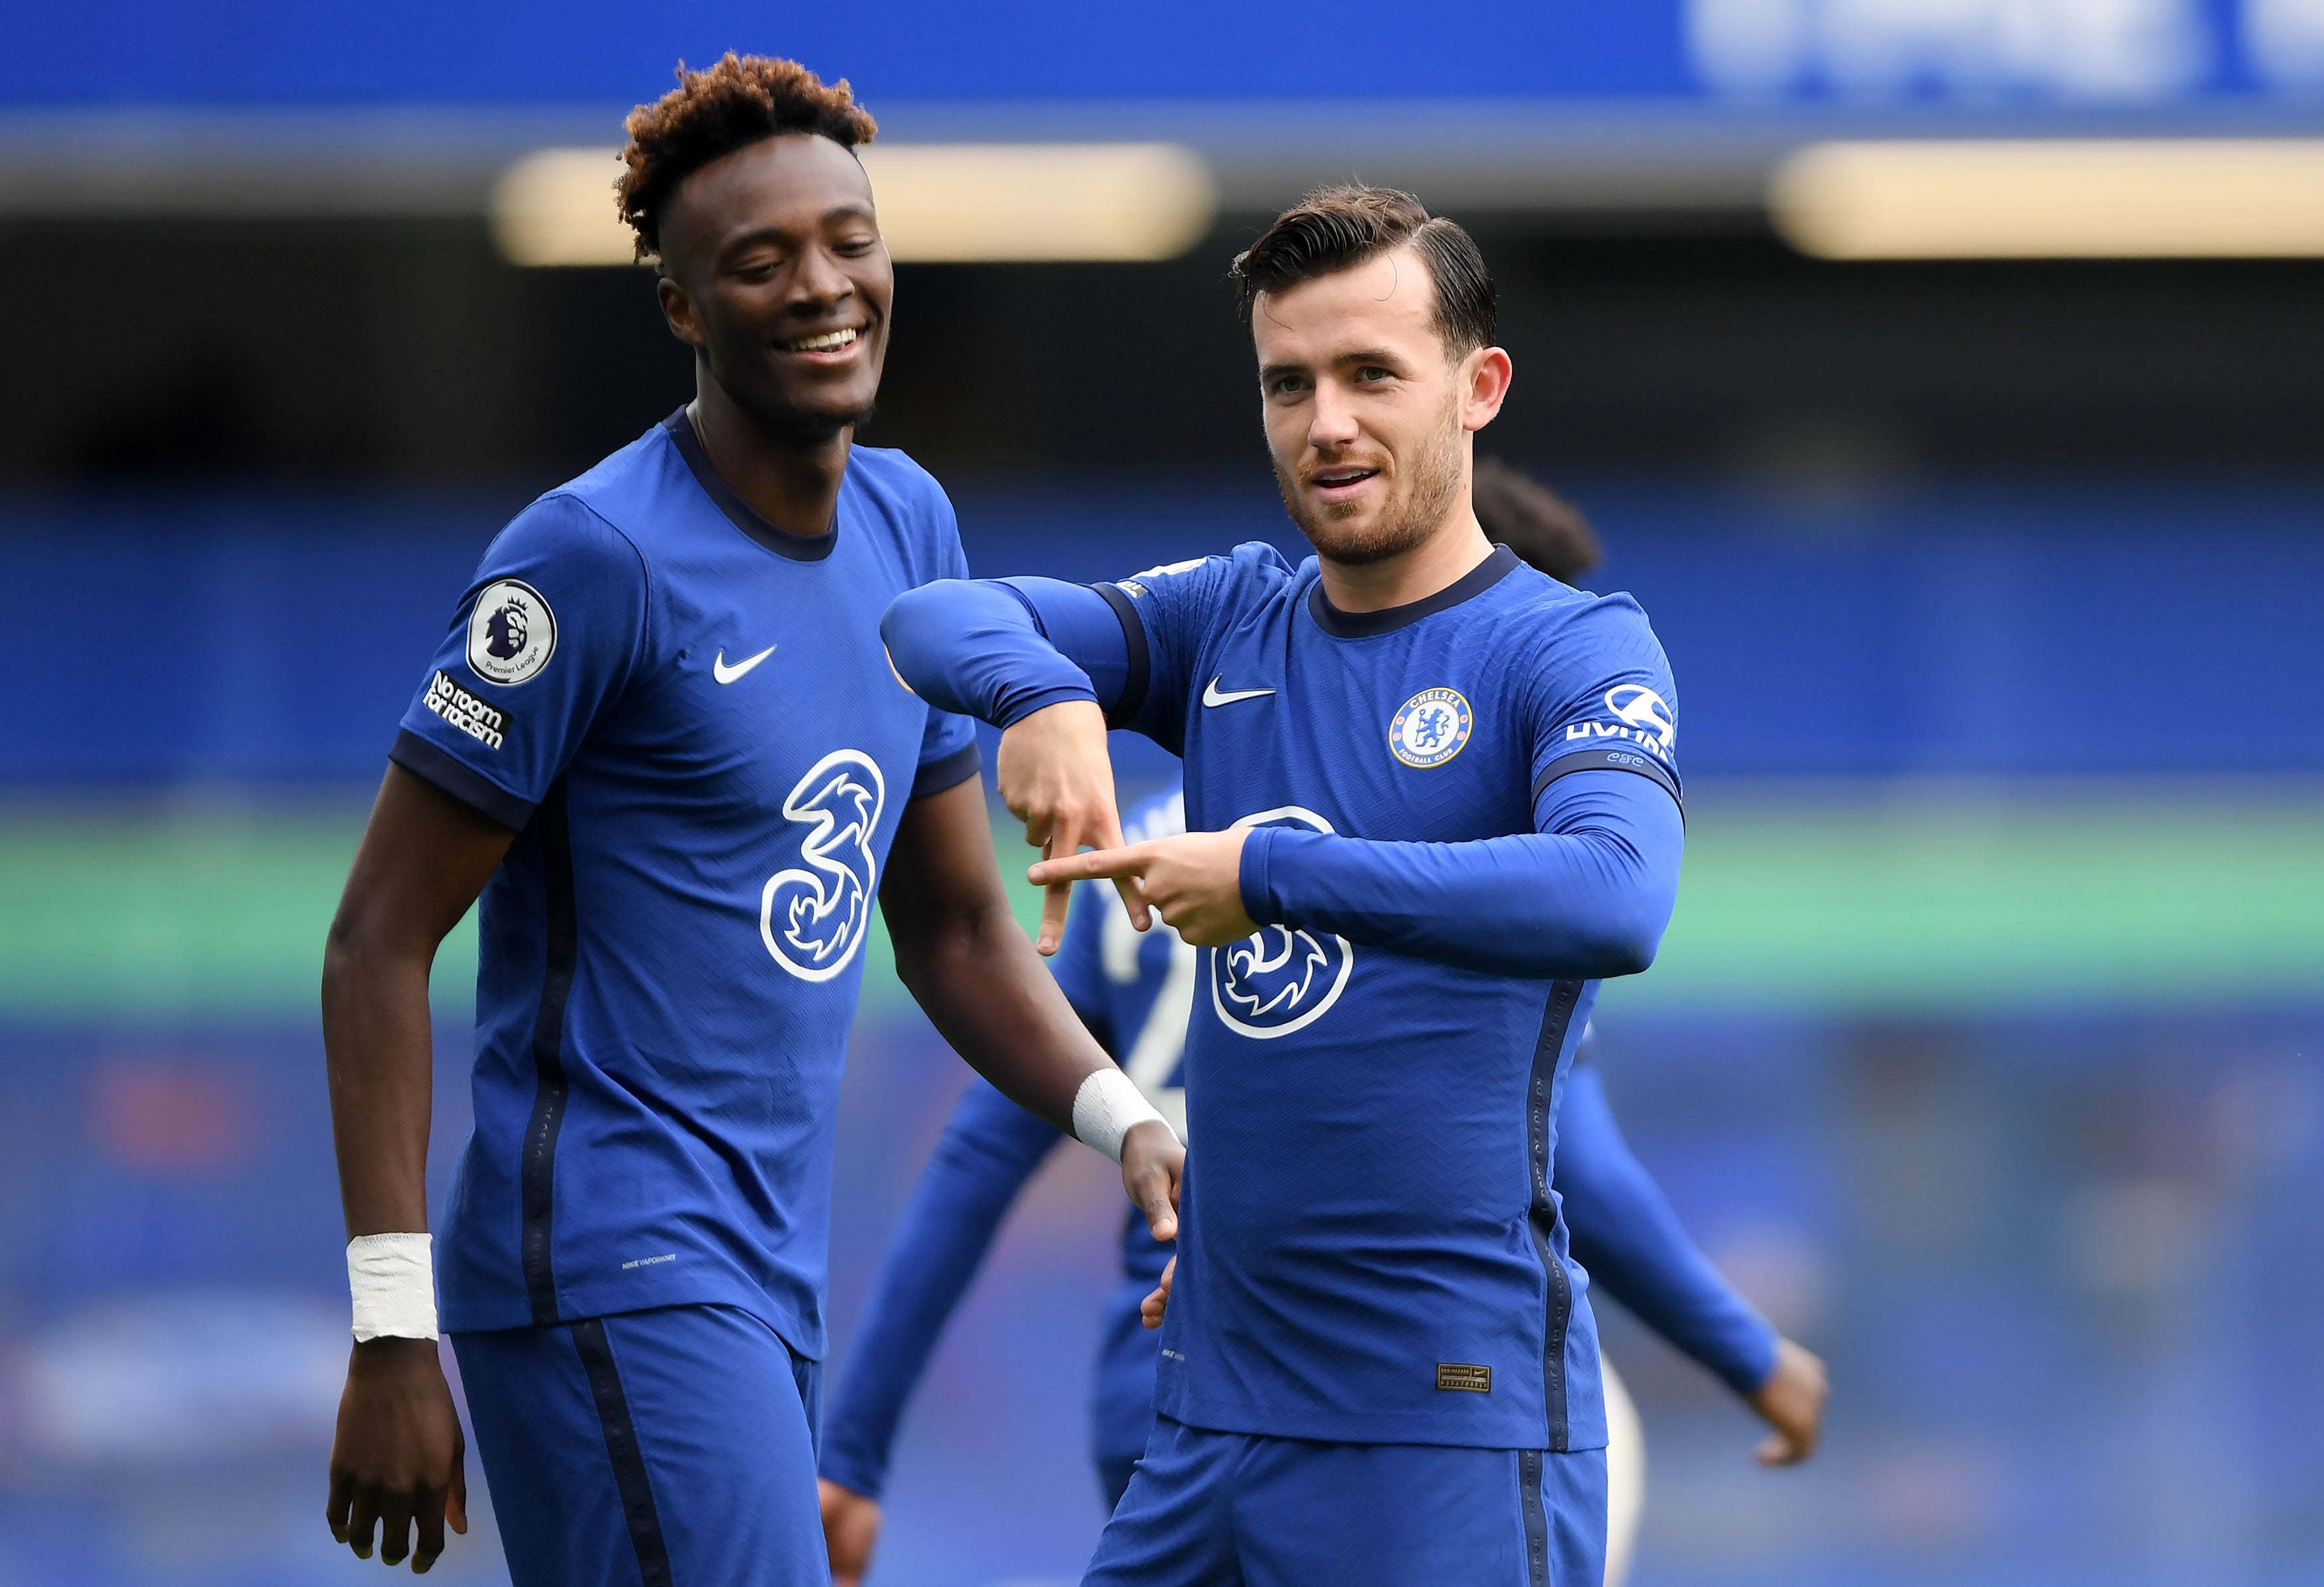 Tammy Abraham and Ben Chilwell, along with Jadon Sancho, will be kept apart from the rest of the England squad